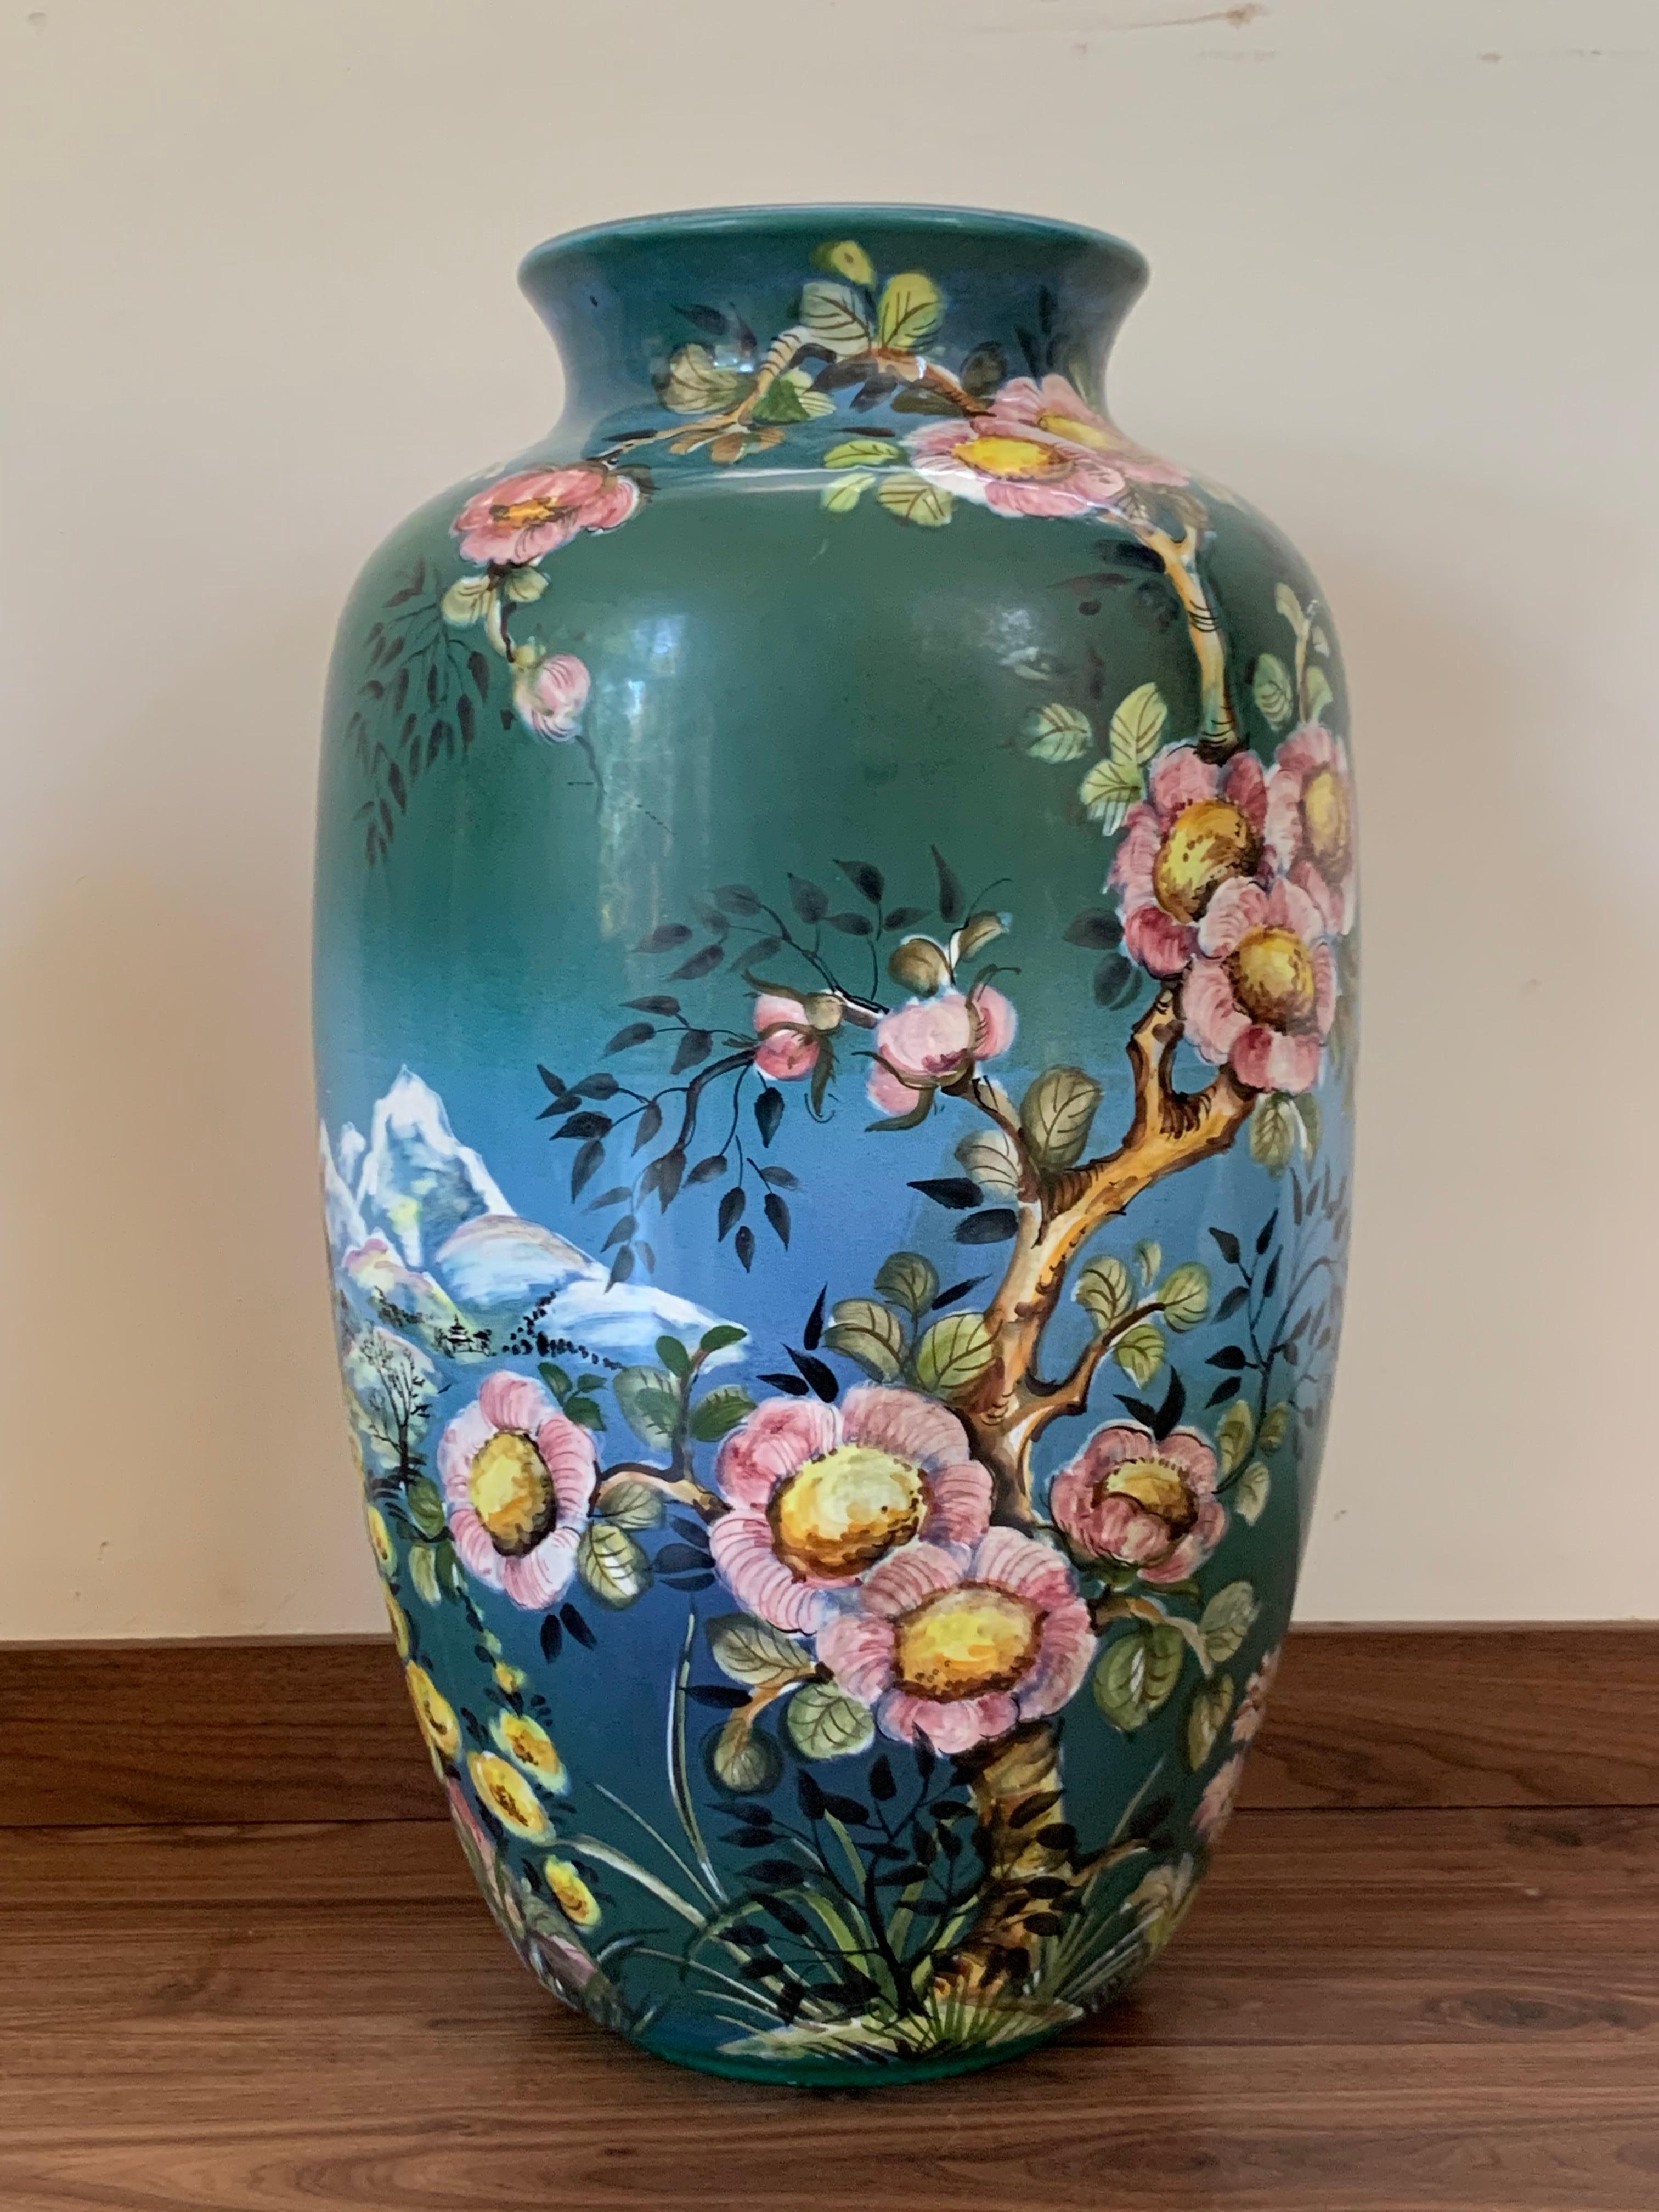 Featuring a painted chinesse scenes with exotic fruits, animals, ocean, and huts. The baluster vase was made by the German company Ulmer Keramik, which was established in Bohemia after World War II. The firm was known for a variety of traditional to